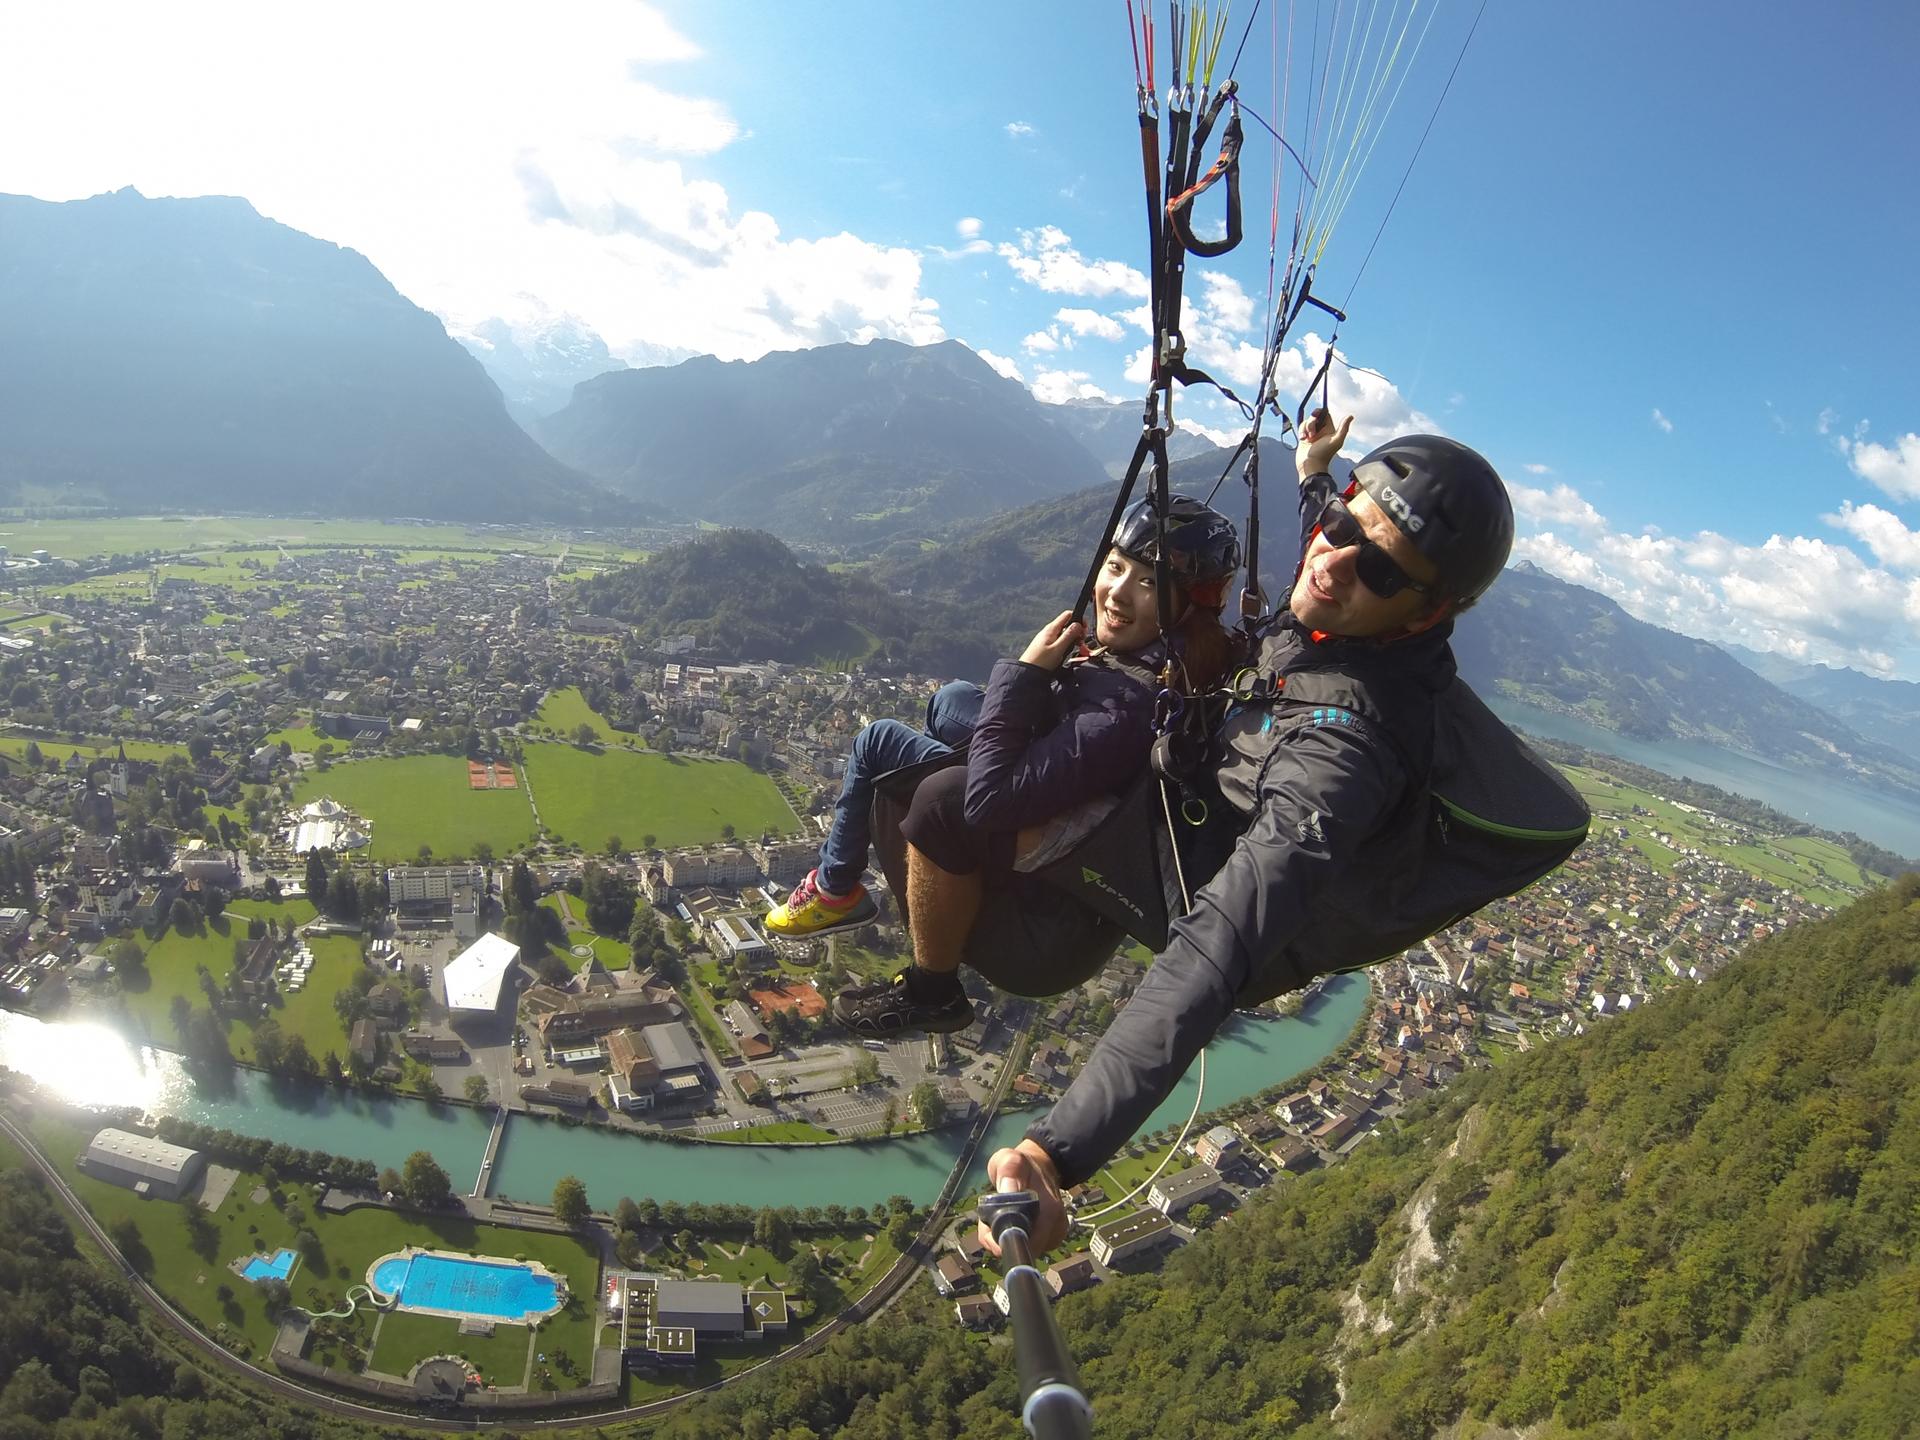 In her book “Europe: There’s No Reason Not to Go,” Hong Seo-yoon writes about accessible paragliding in Switzerland.  